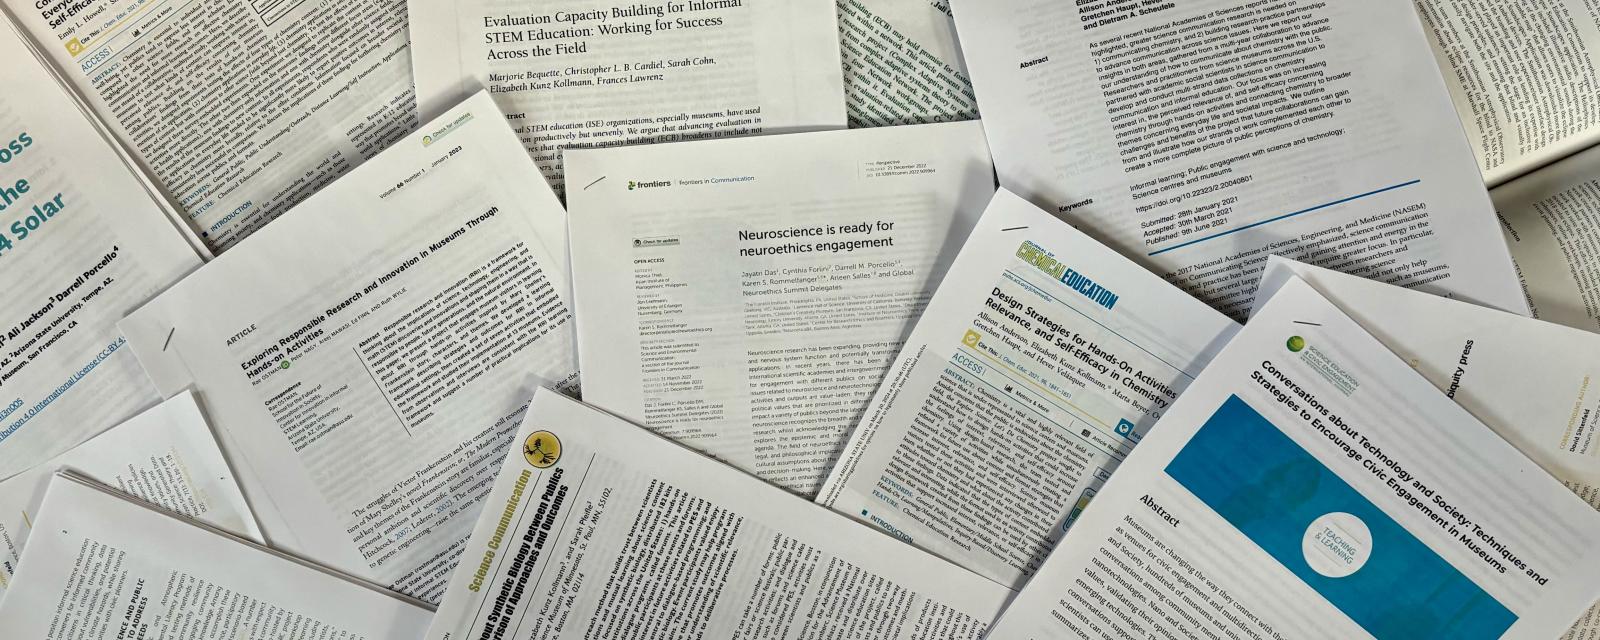 Publications and published papers from the NISE Network projects printed and arranged in a pile